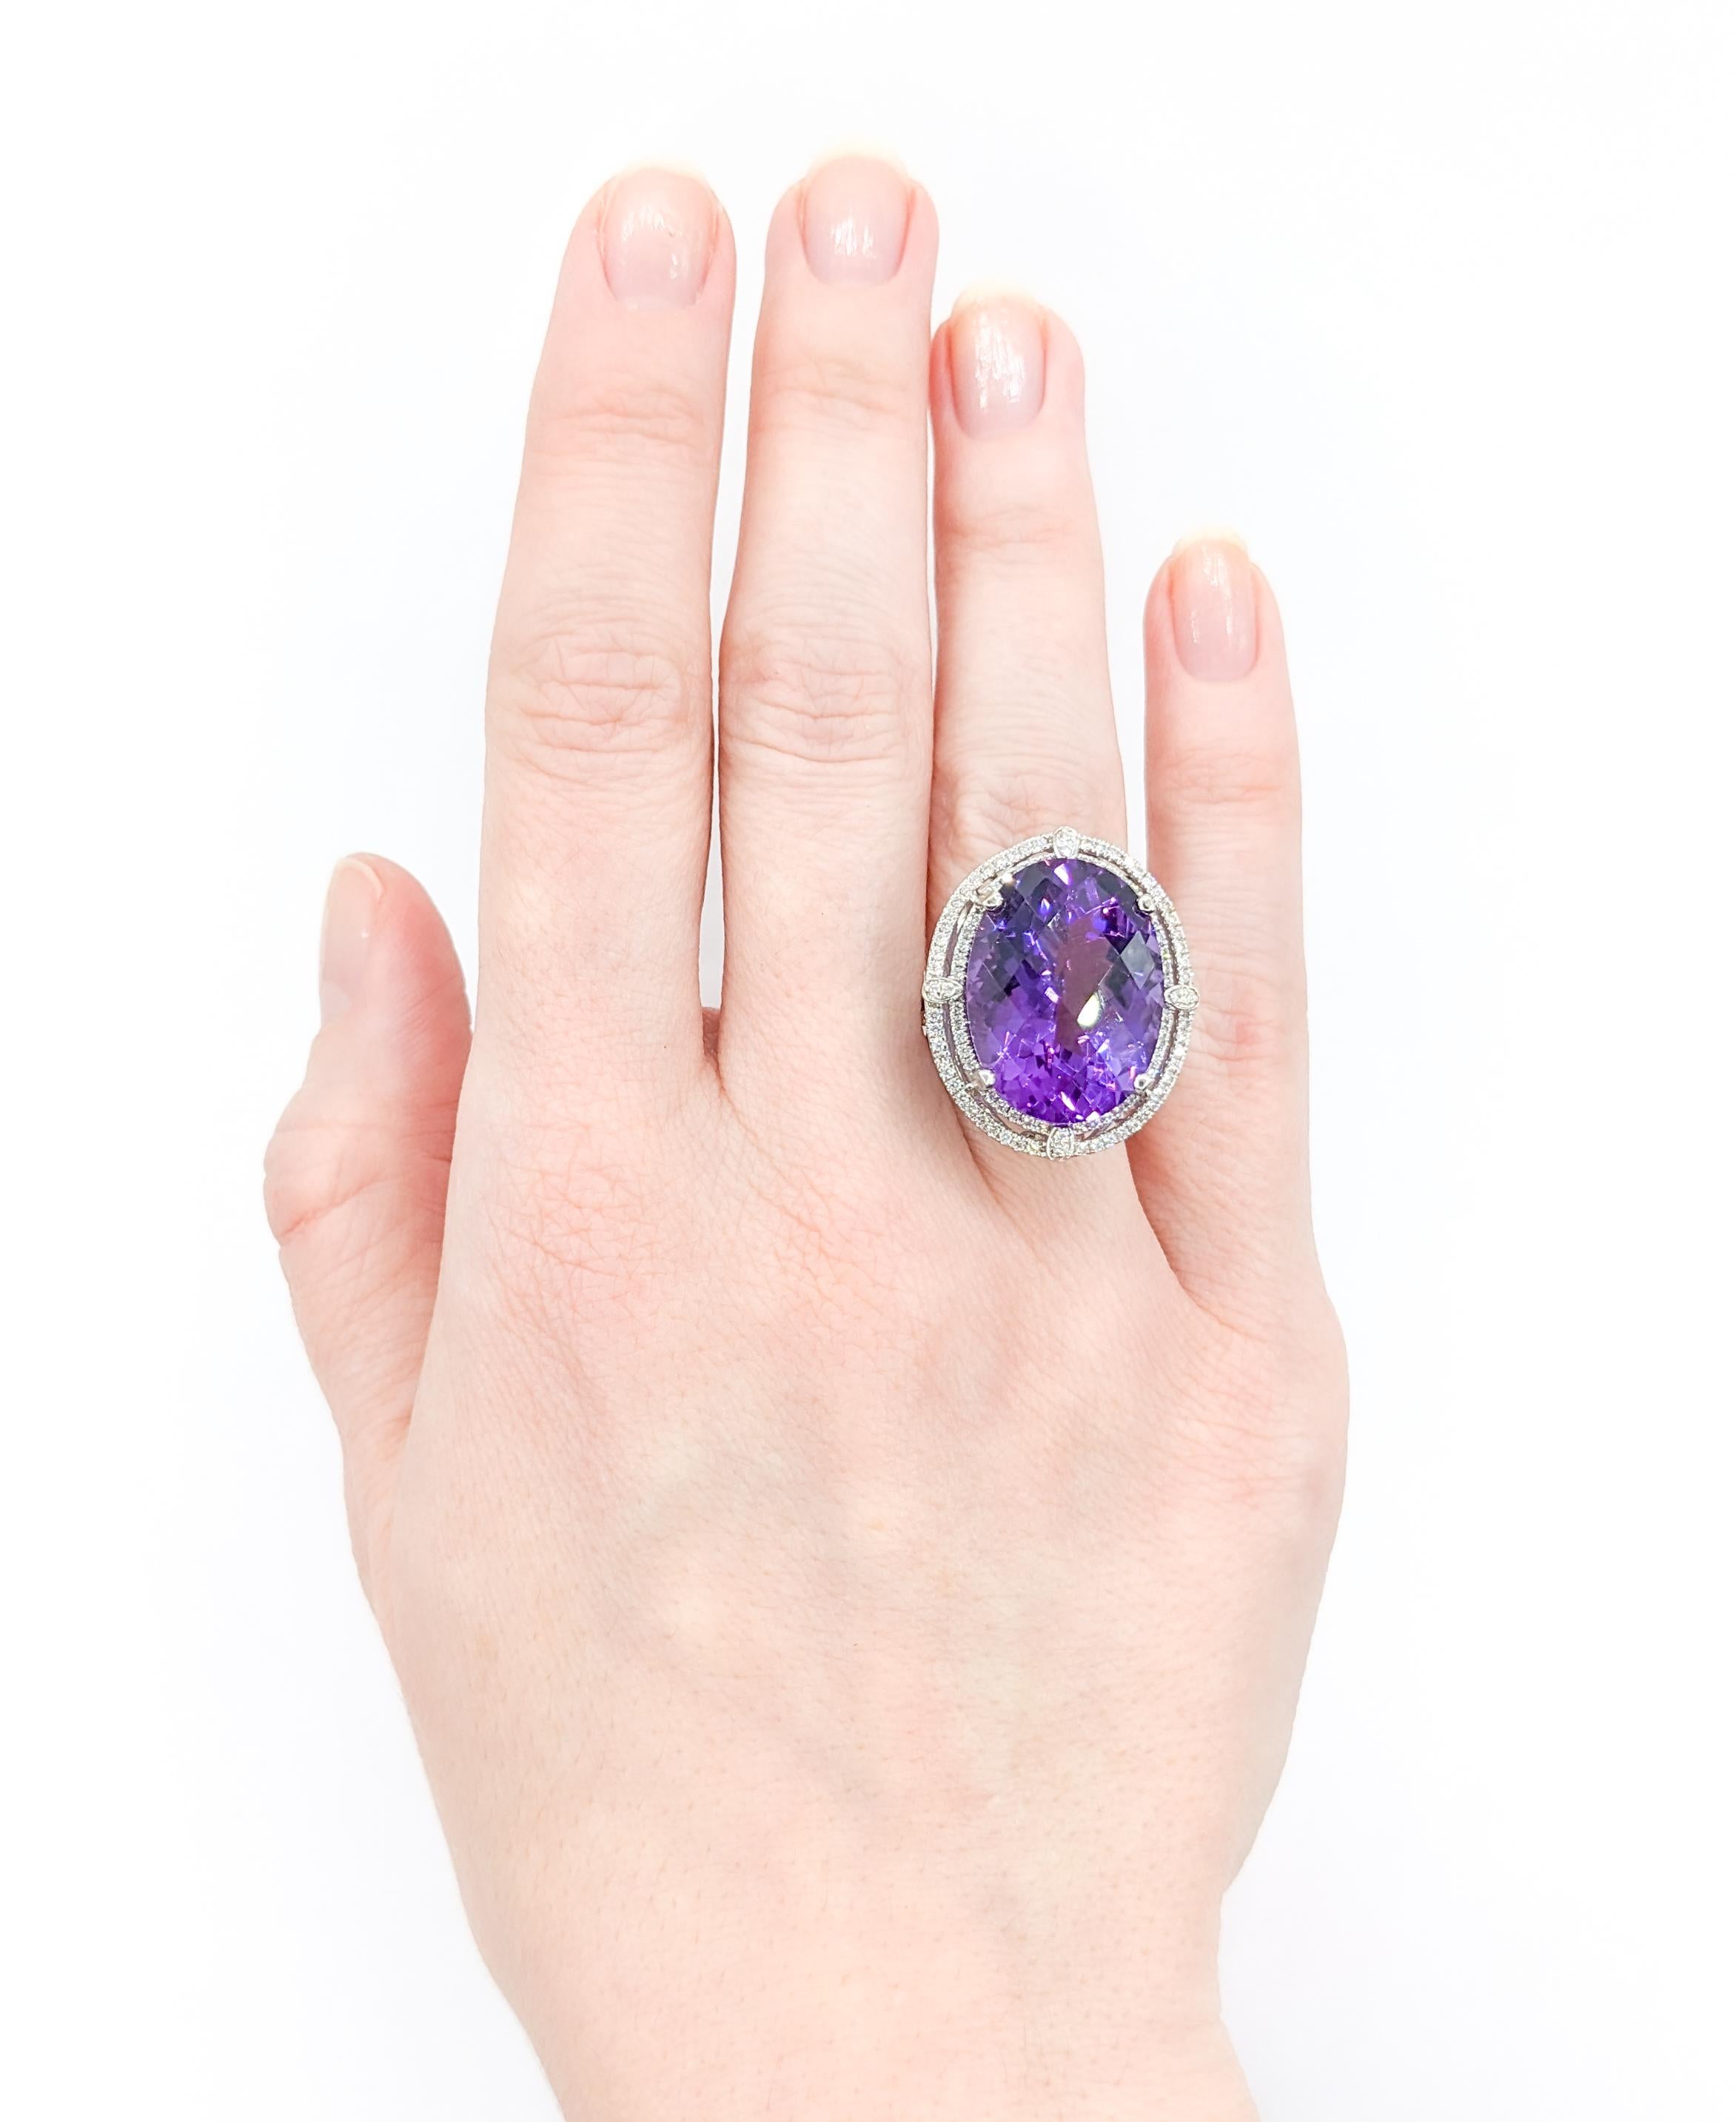 Women's 16.68ct Amethyst & Diamonds Cocktail Ring In White Gold